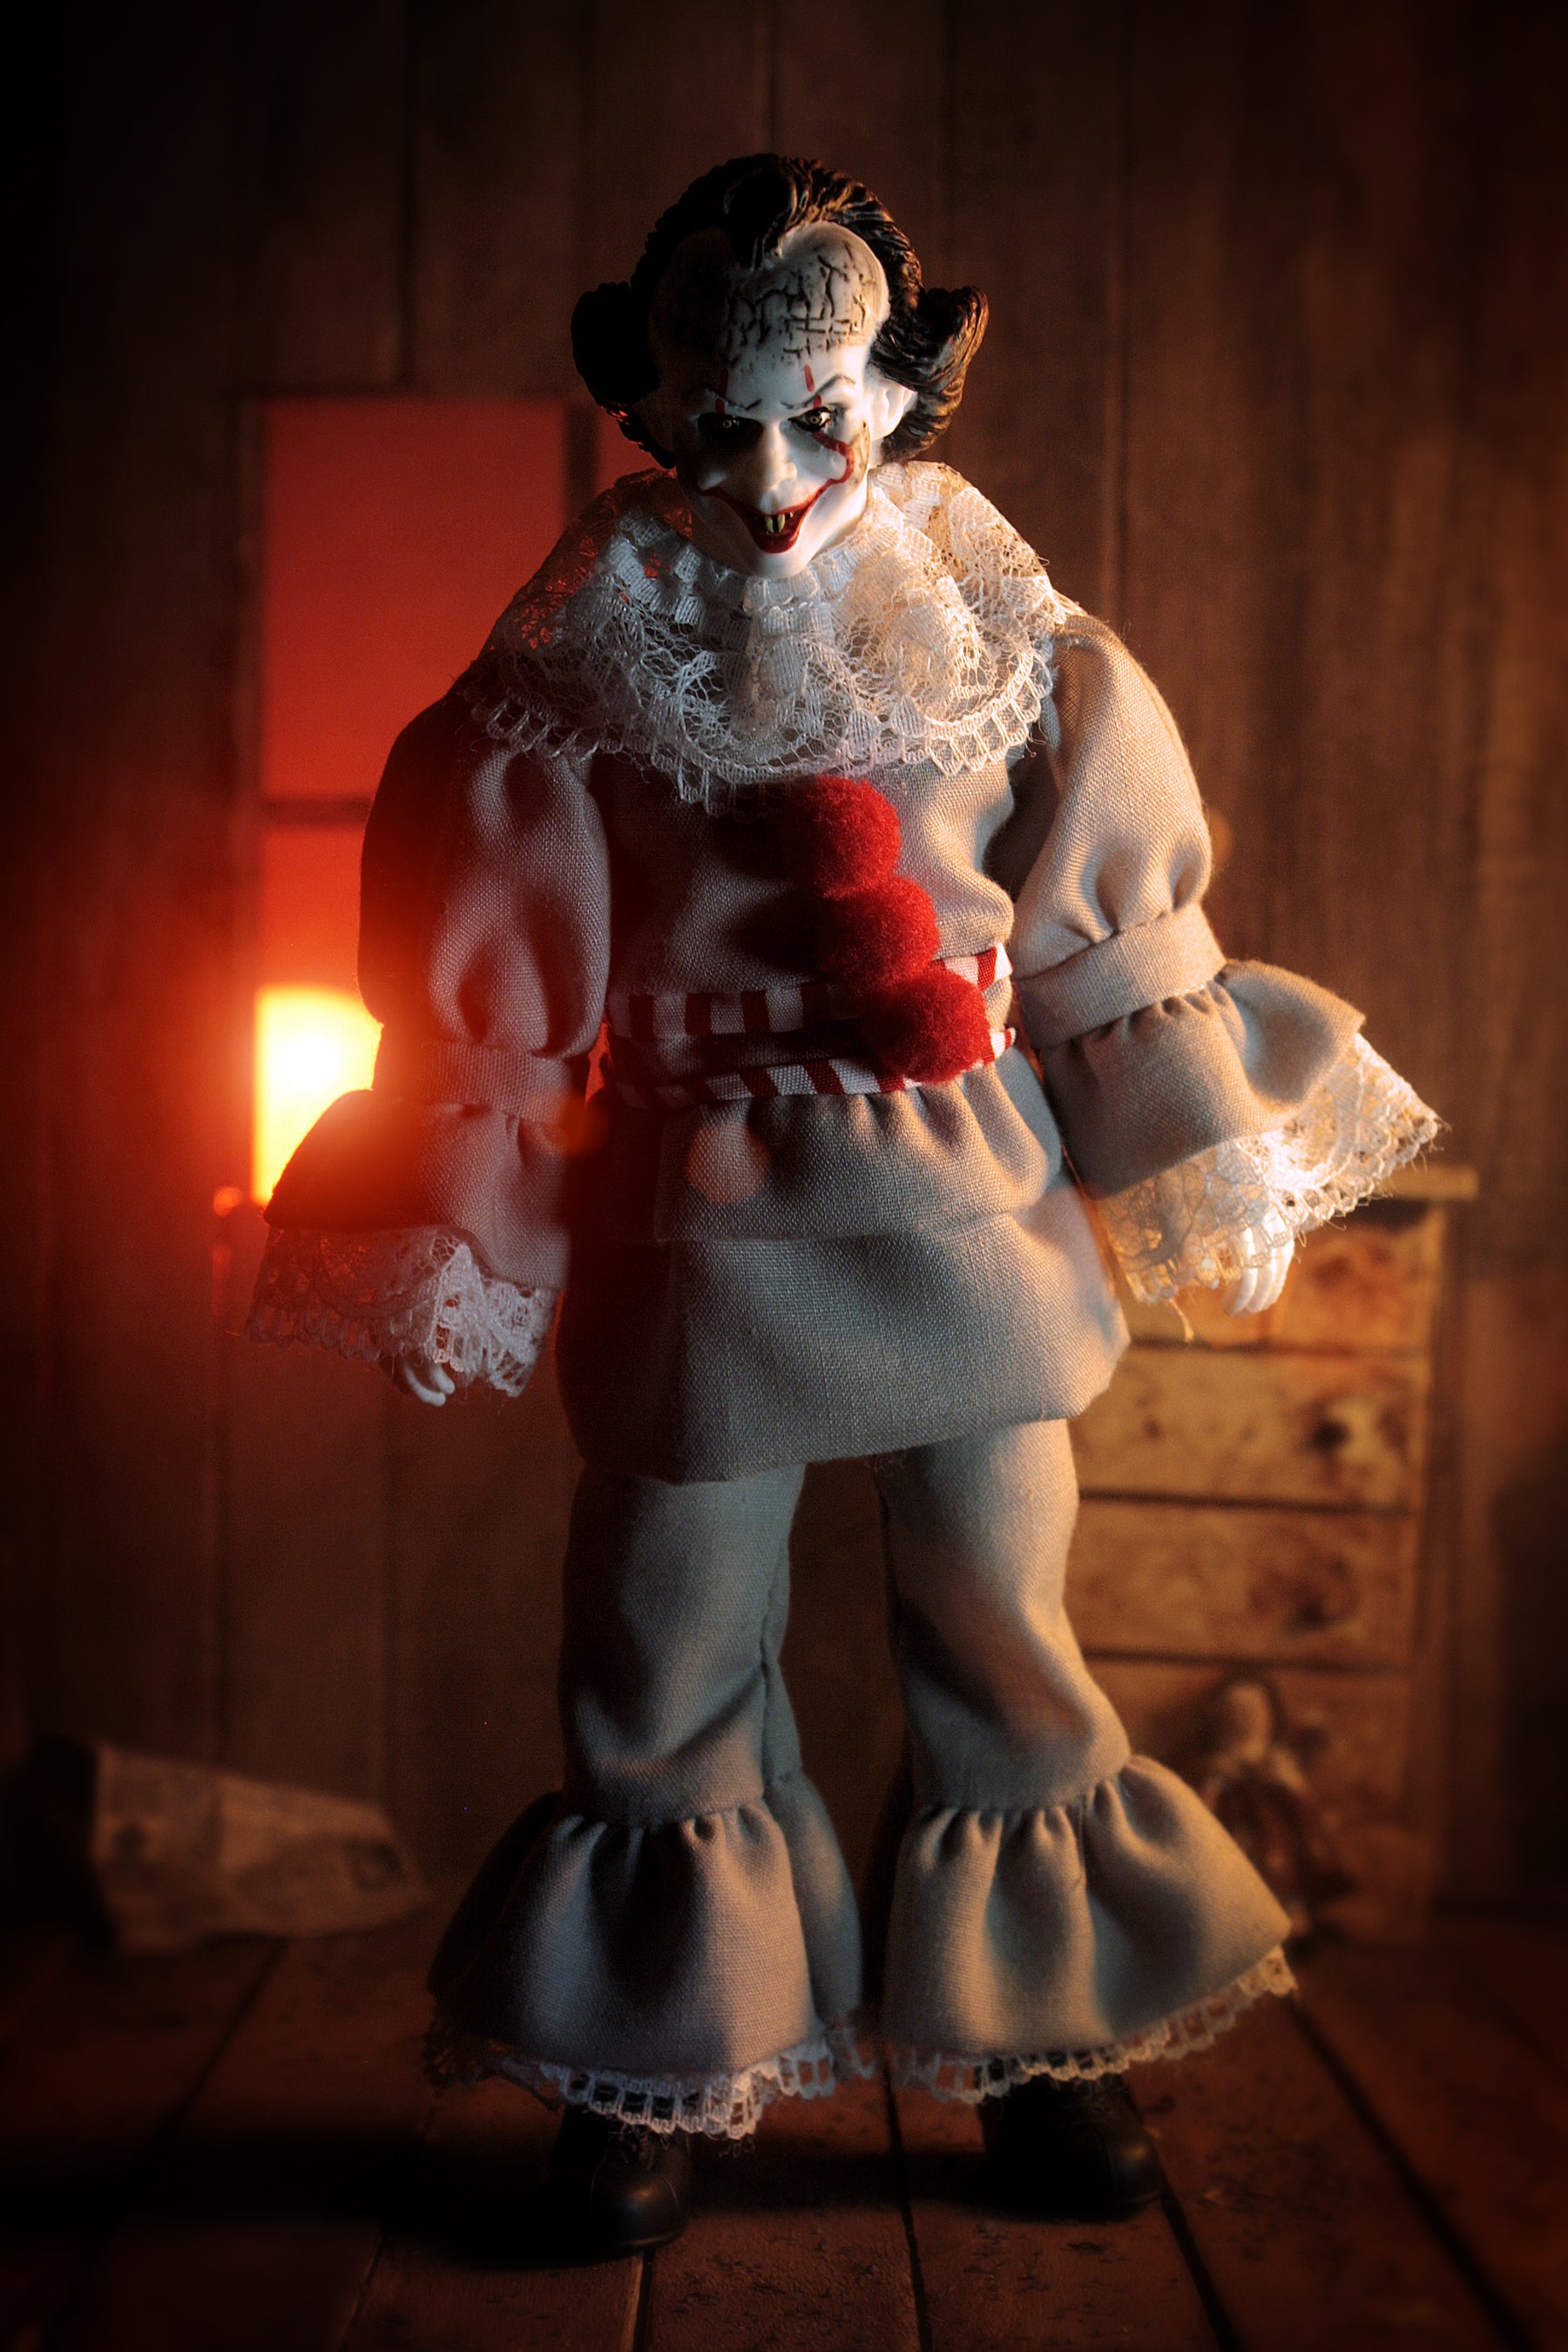 Mego Horror Wave 14 - Pennywise (2017) 8 Action Figure